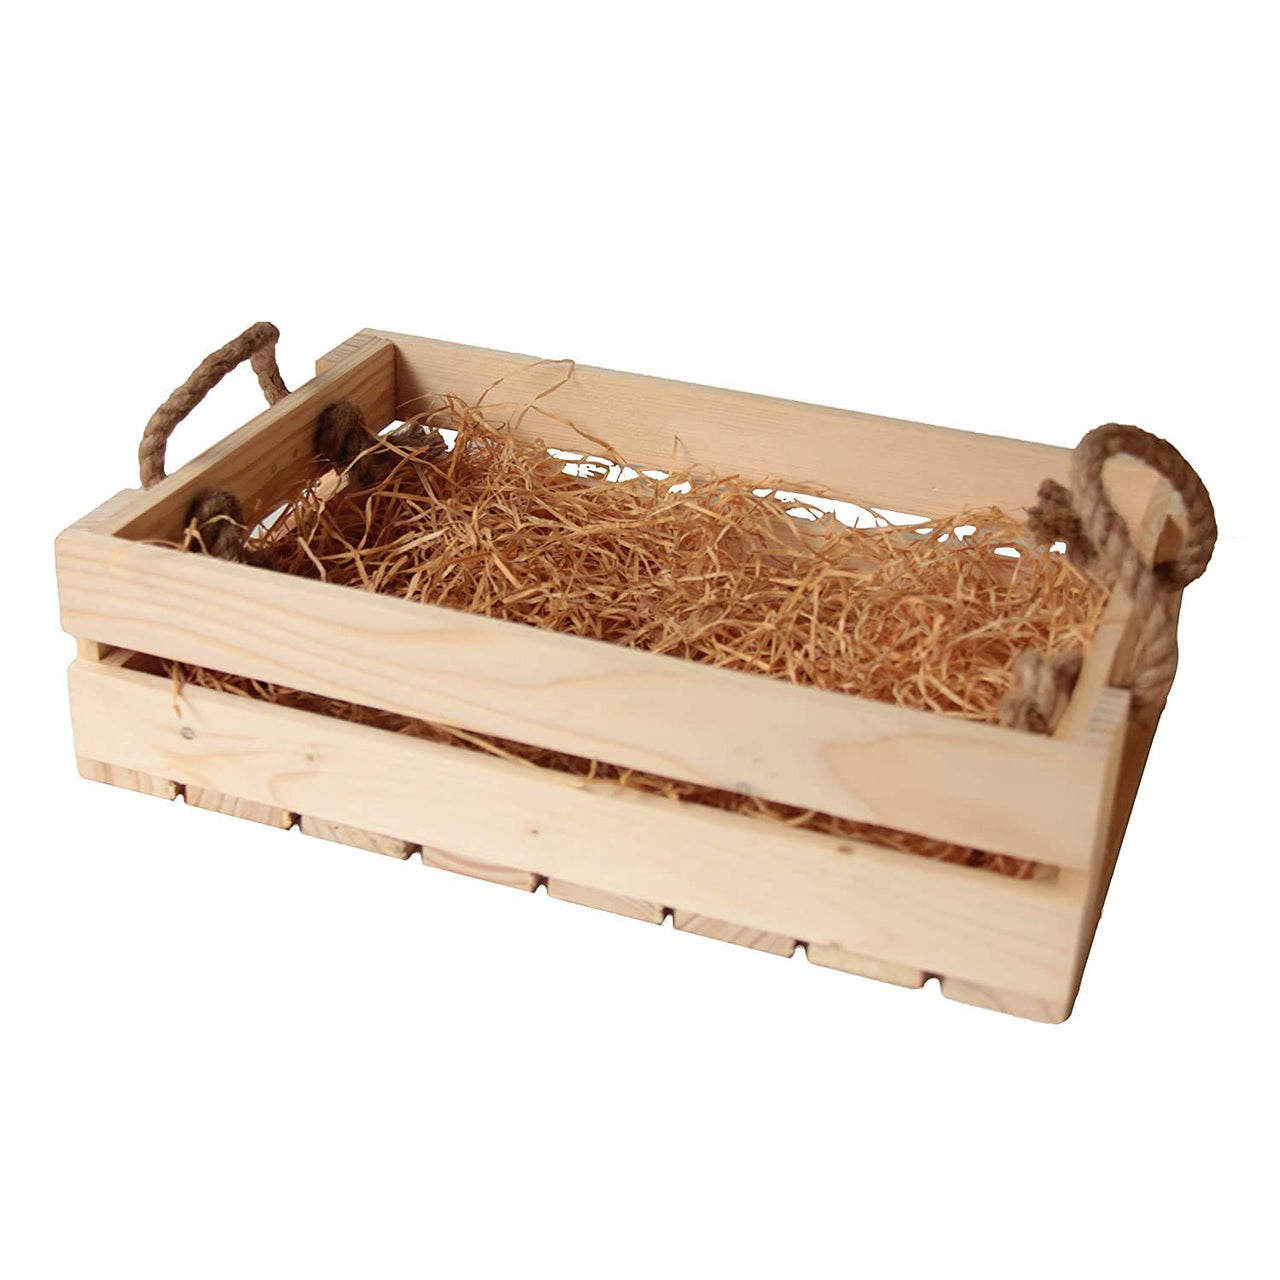 Hard Wood Decorative Gifting Basket Gift Hamper Basket Wooden Tray Flower Fruits Basket Tray With Dried Grass Dime Store